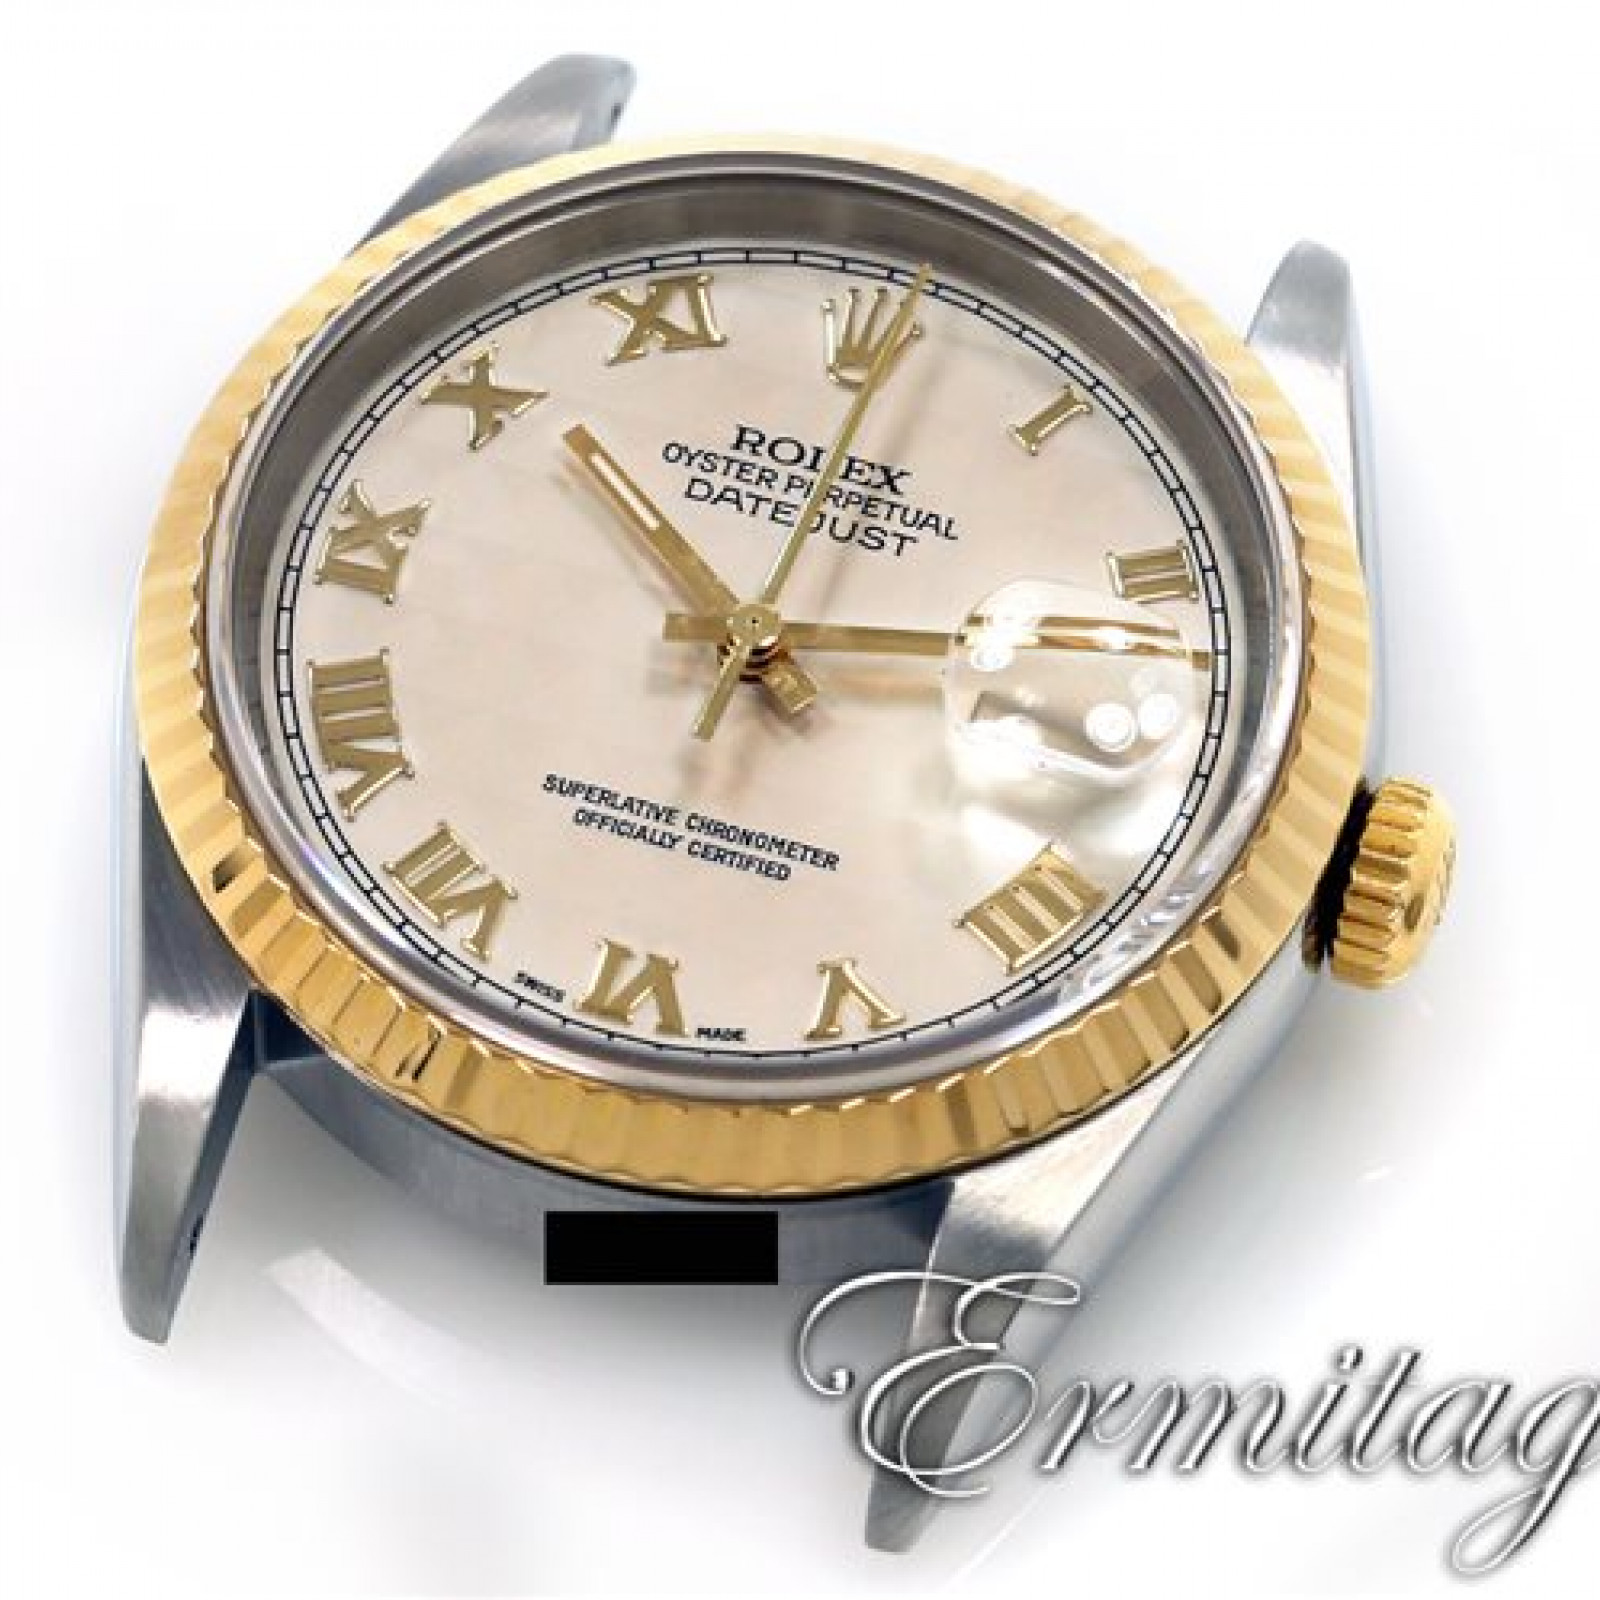 Rolex Datejust Ref 16233 Year 1998 with Pyramid Dial and Gold Roman Markers.